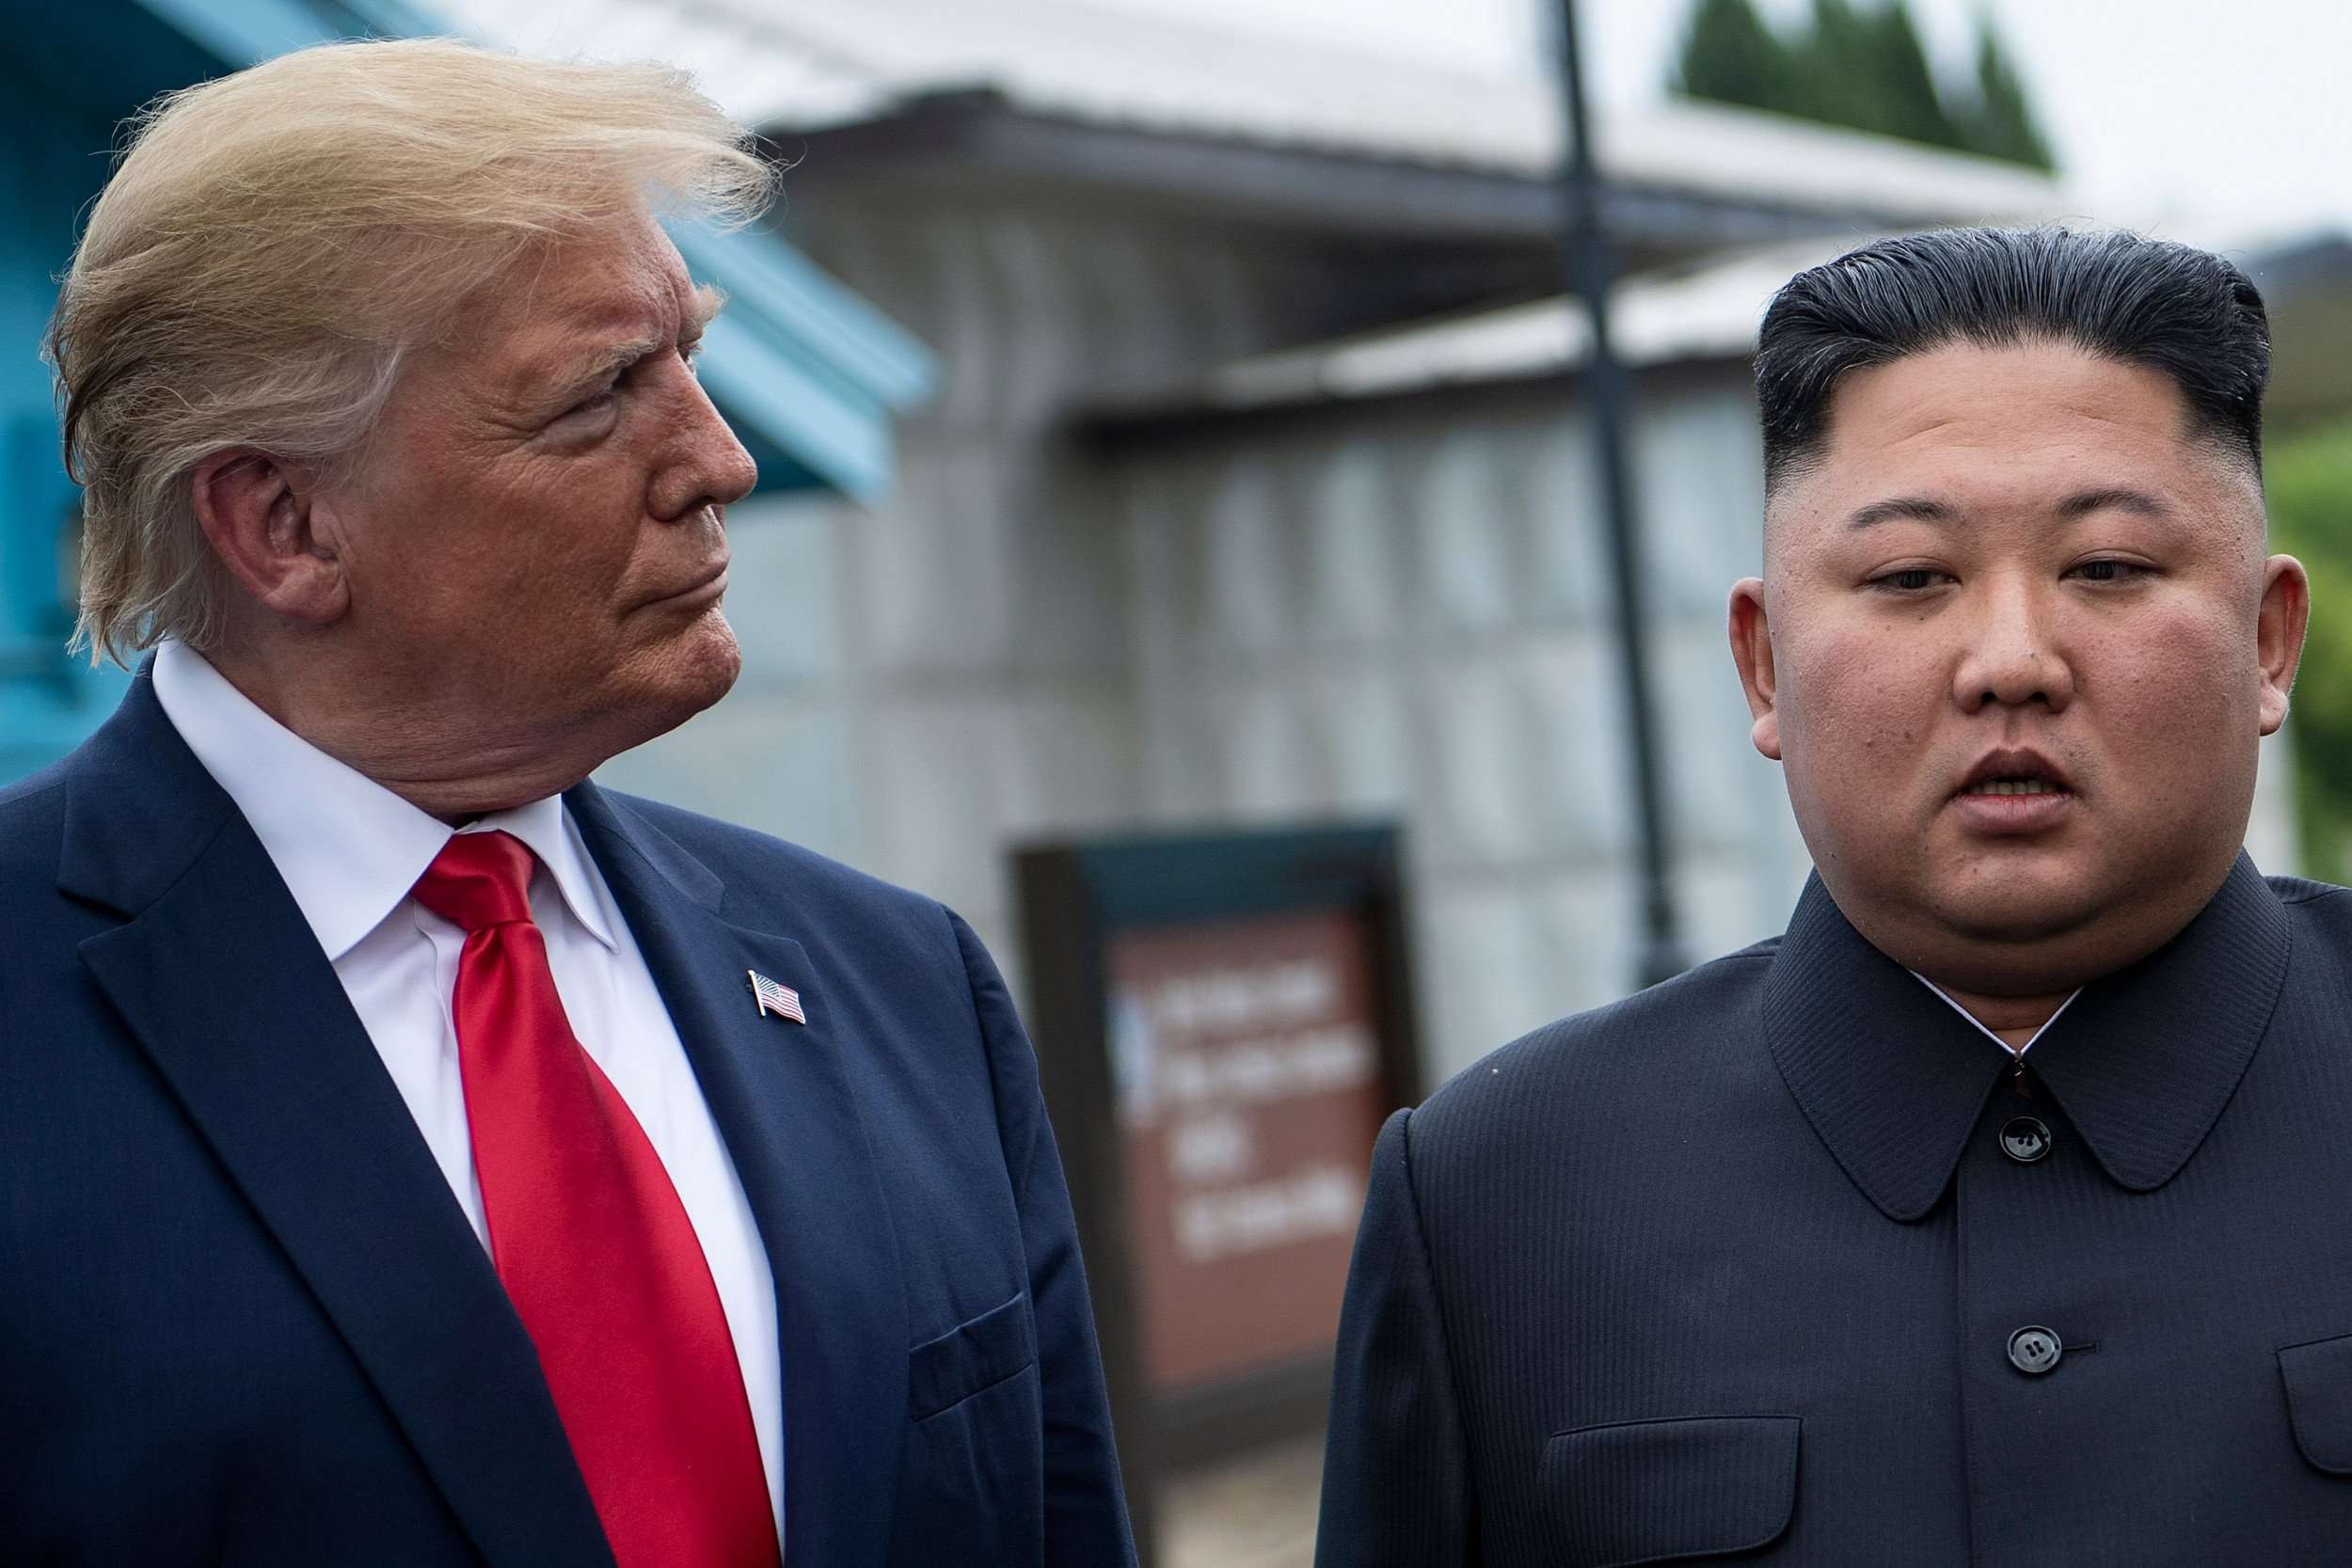 image for Kim Jong Un Wants Trump to Win in 2020, Former White House Adviser Says: 'All the Bad Guys Want Trump to Win'